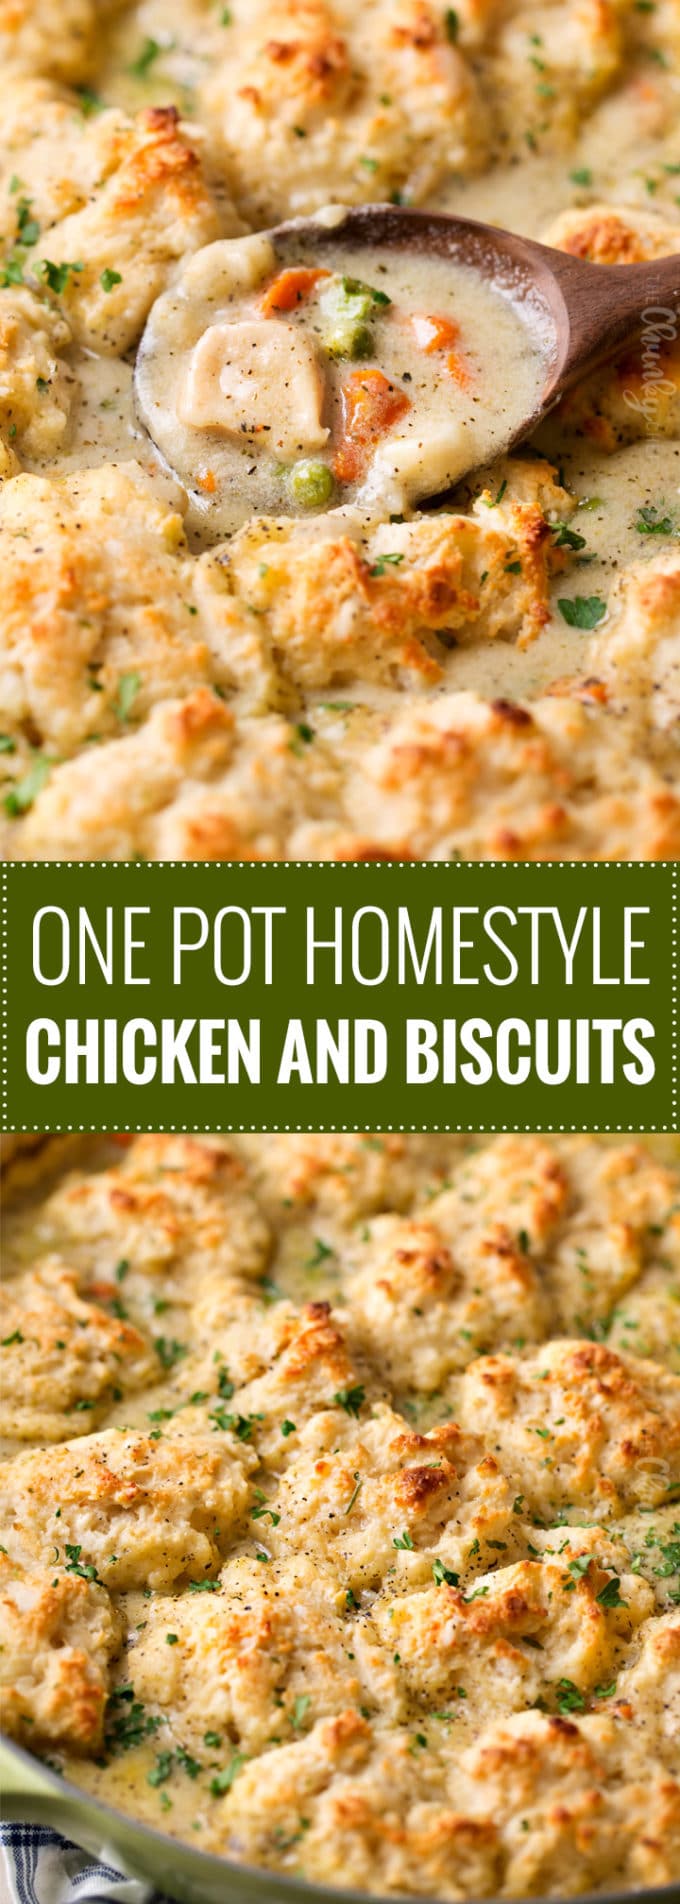 Homestyle Chicken and Biscuits - The Chunky Chef